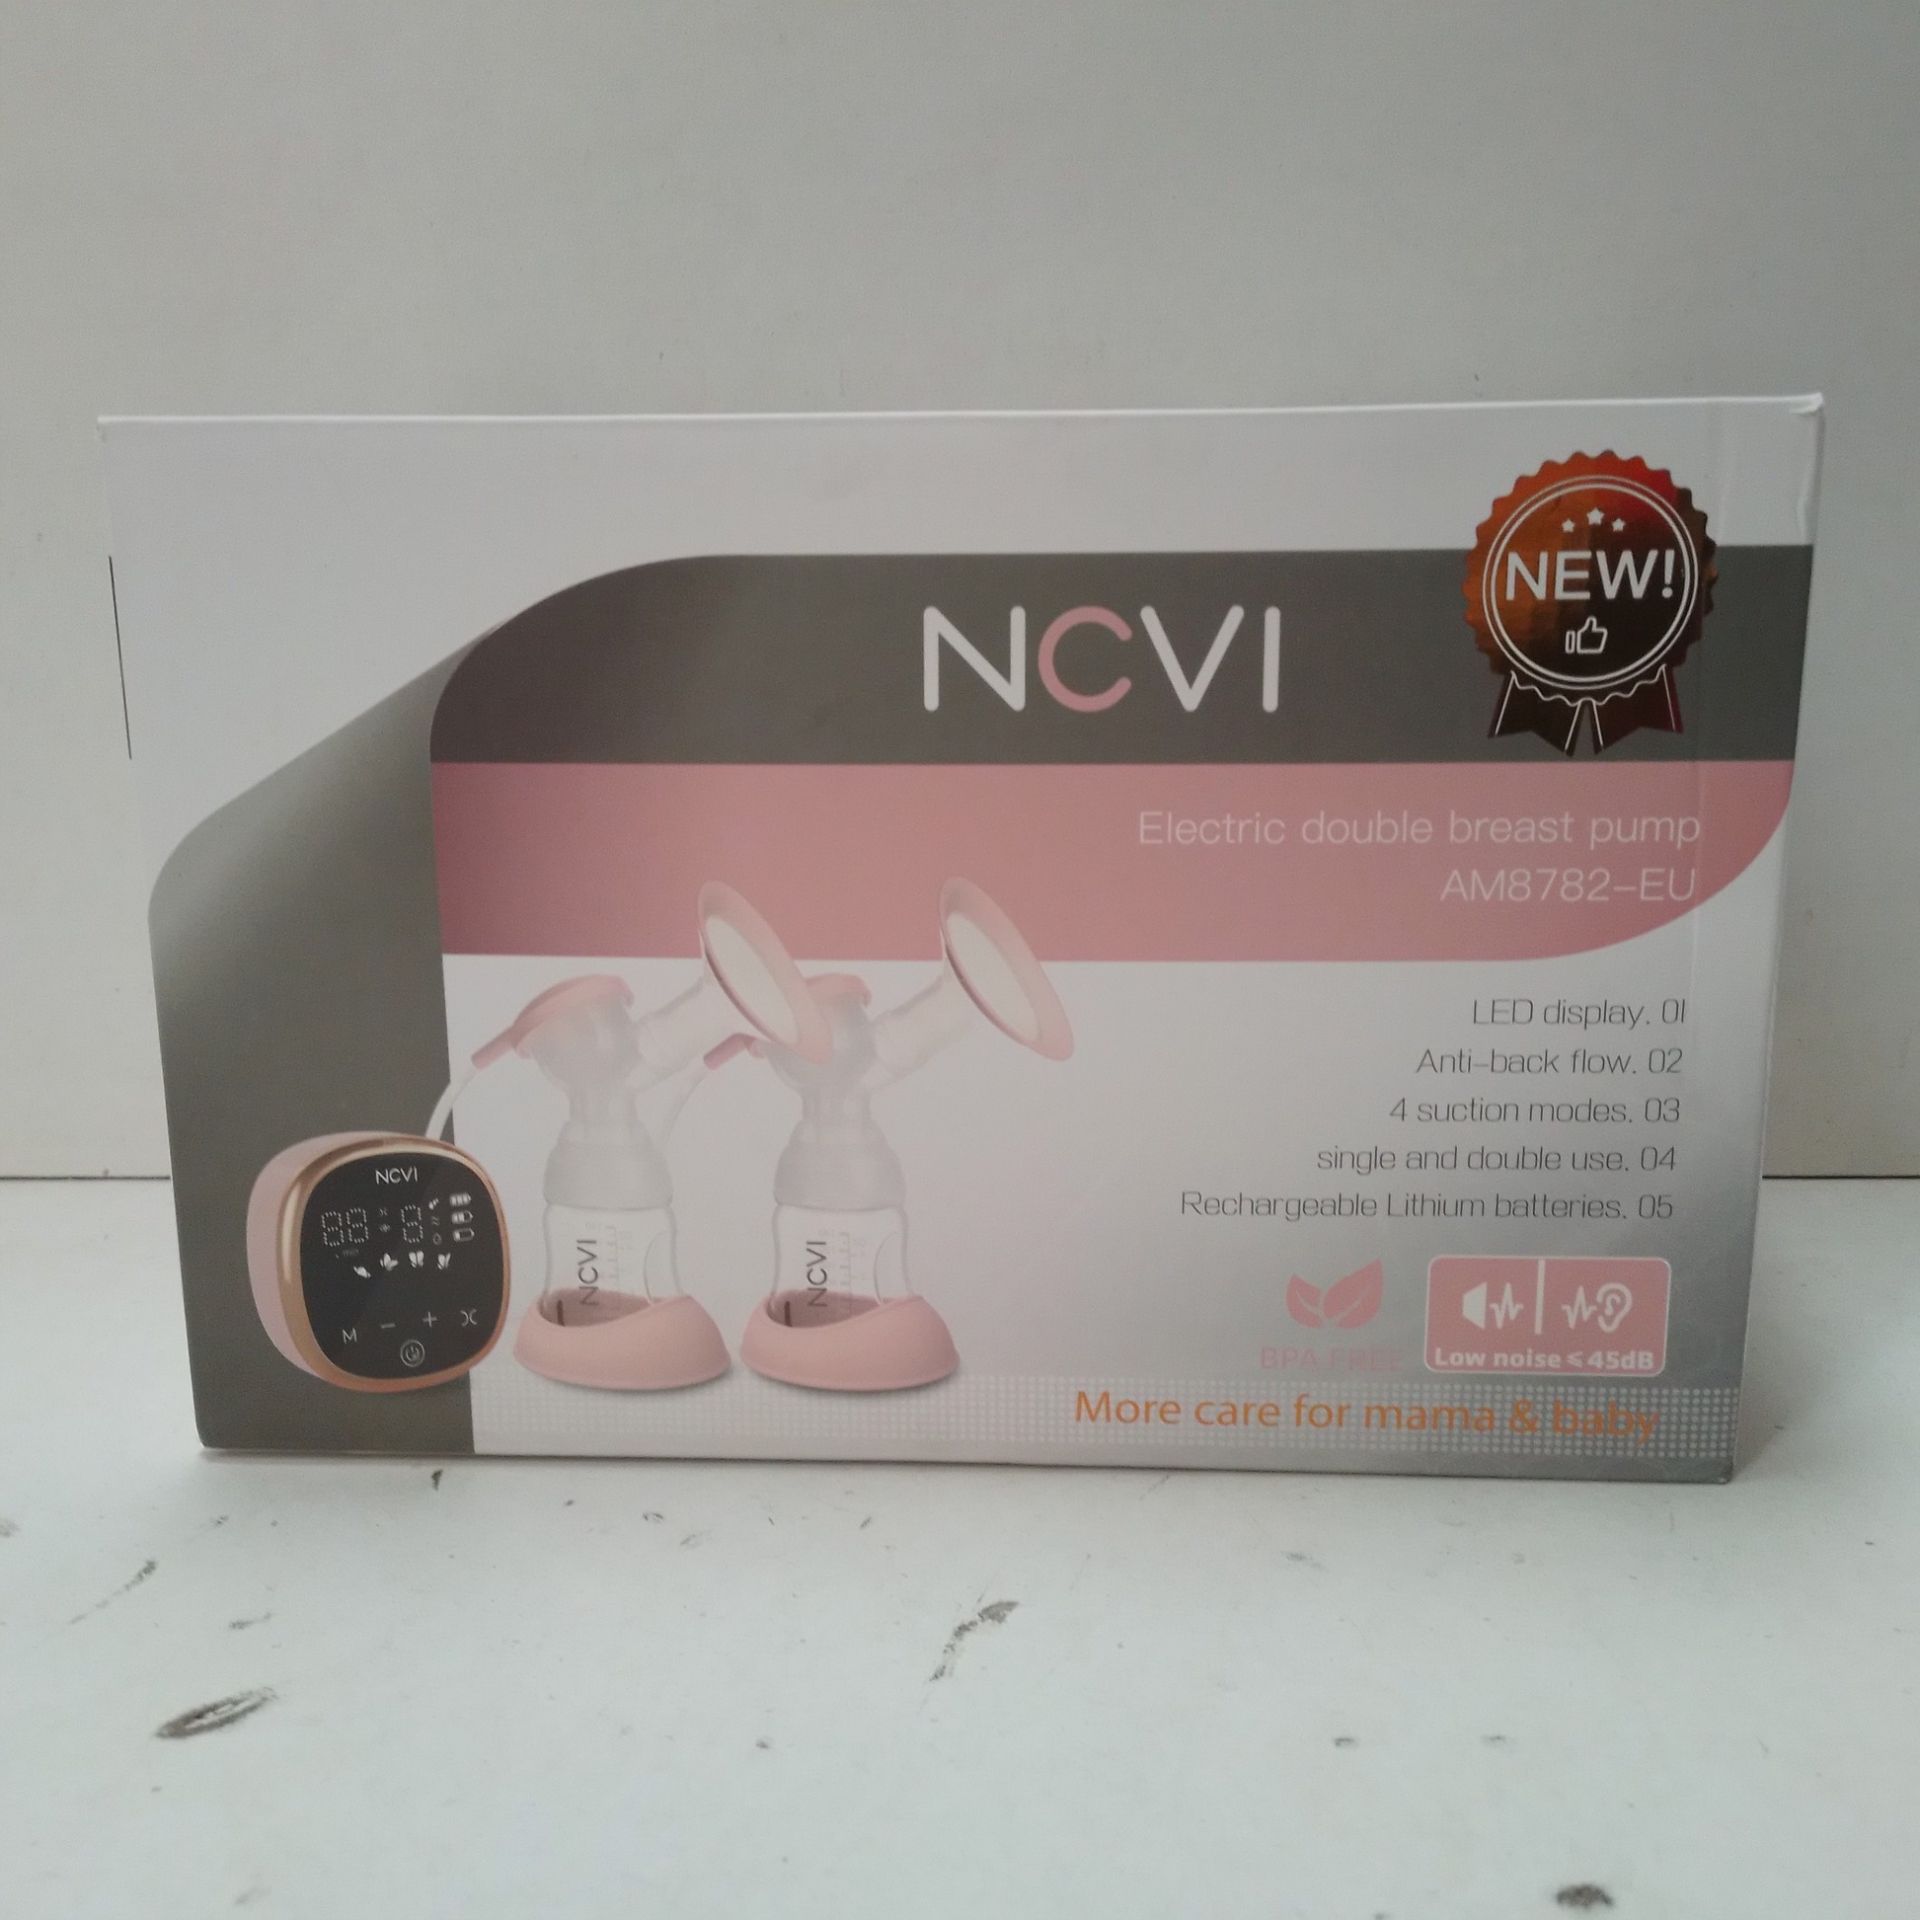 RRP £52.99 NCVI Double Electric Breast Pumps - Image 2 of 2